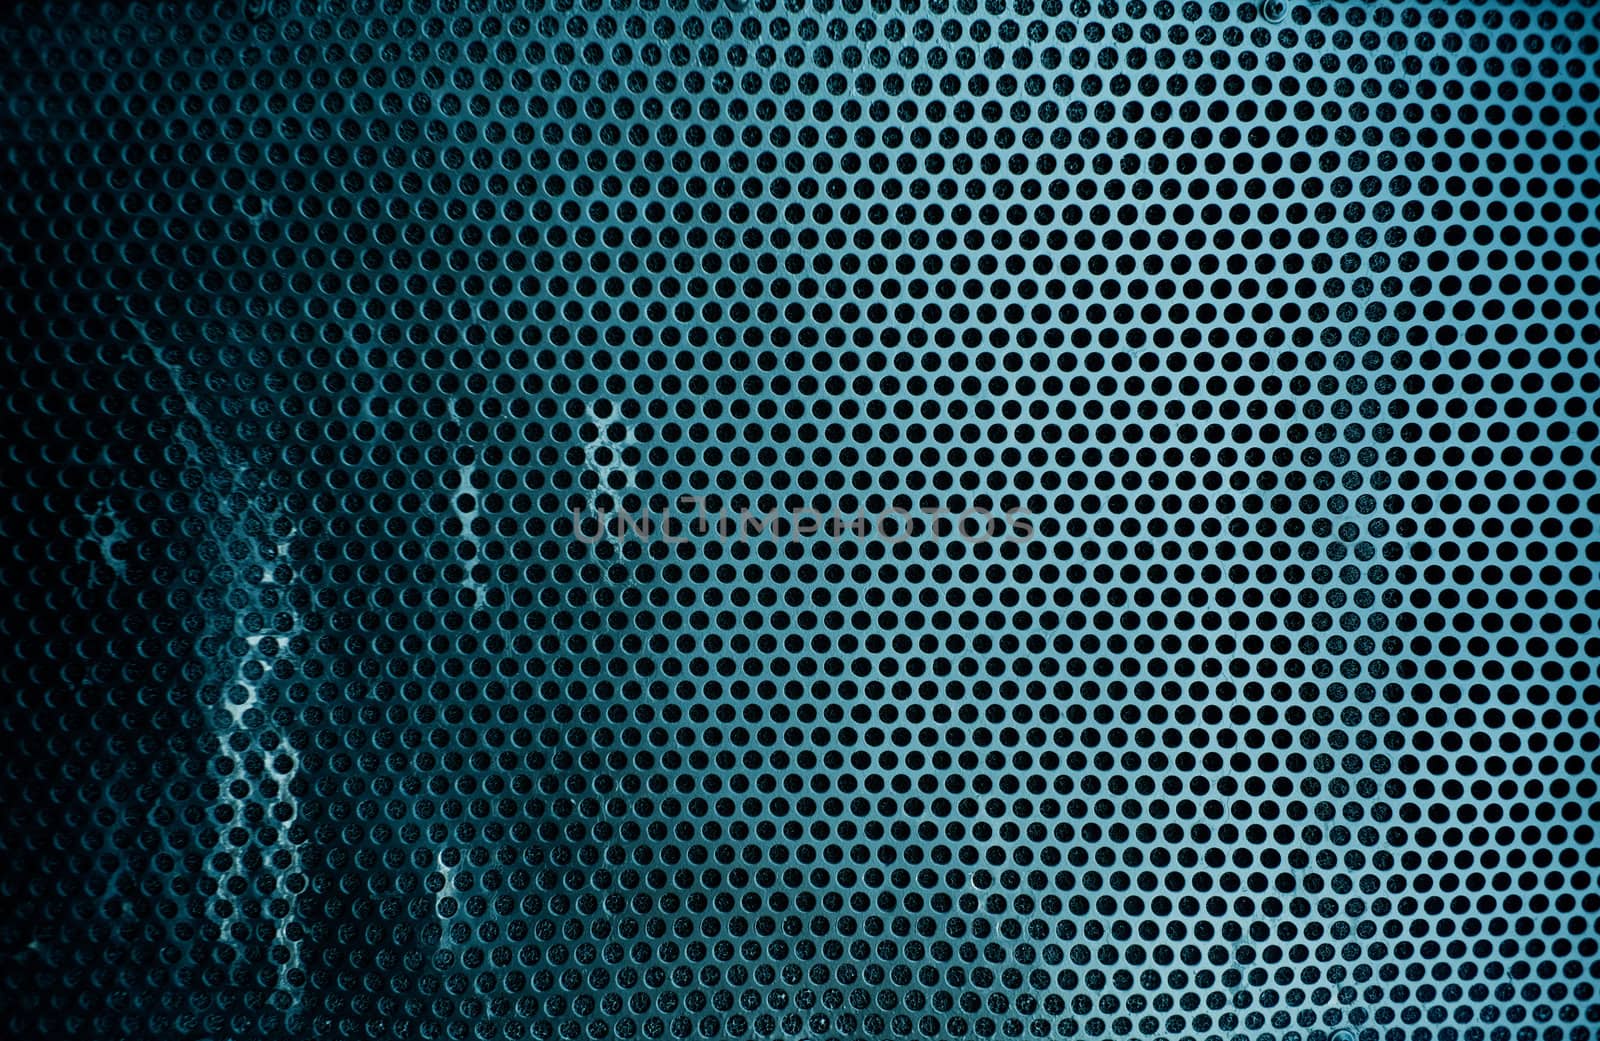 Close up image of grid metal texture